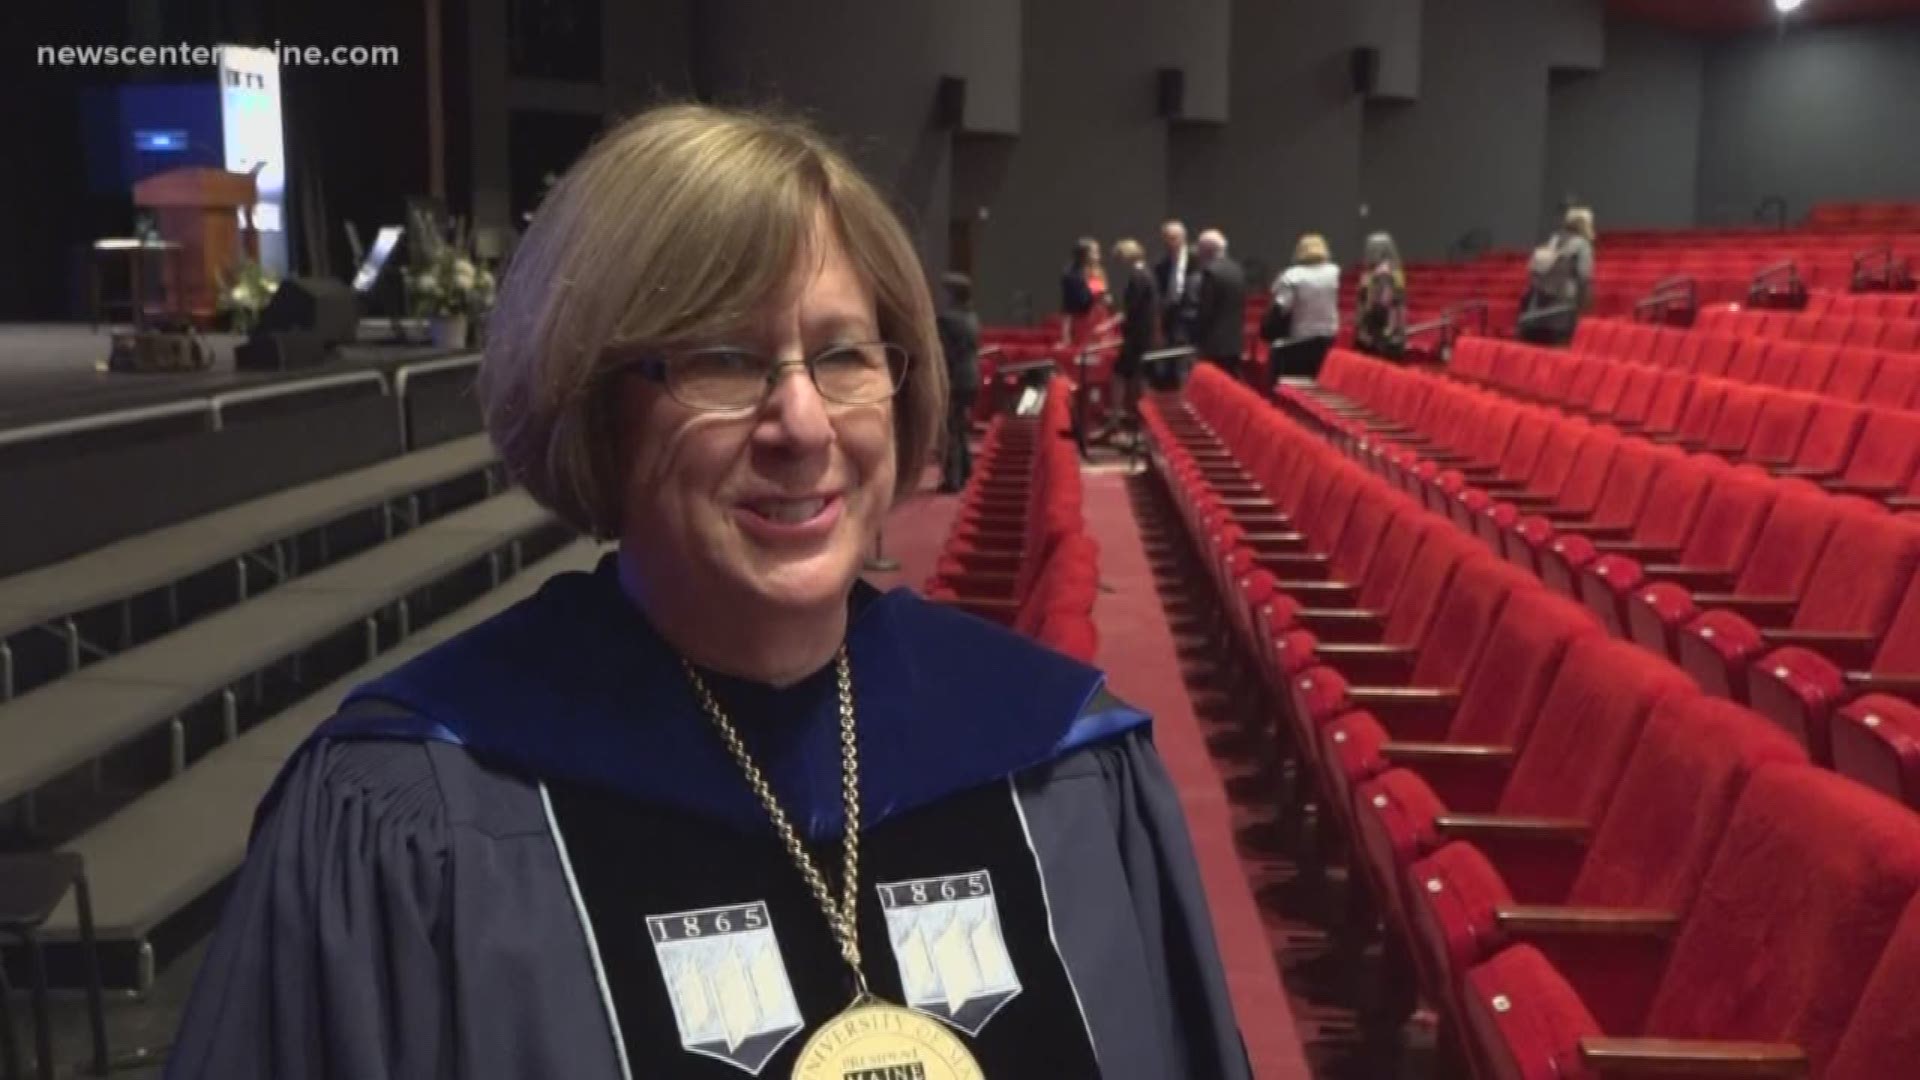 Joan Ferrini-Mundy was inaugurated as the new president at the University of Maine Friday.